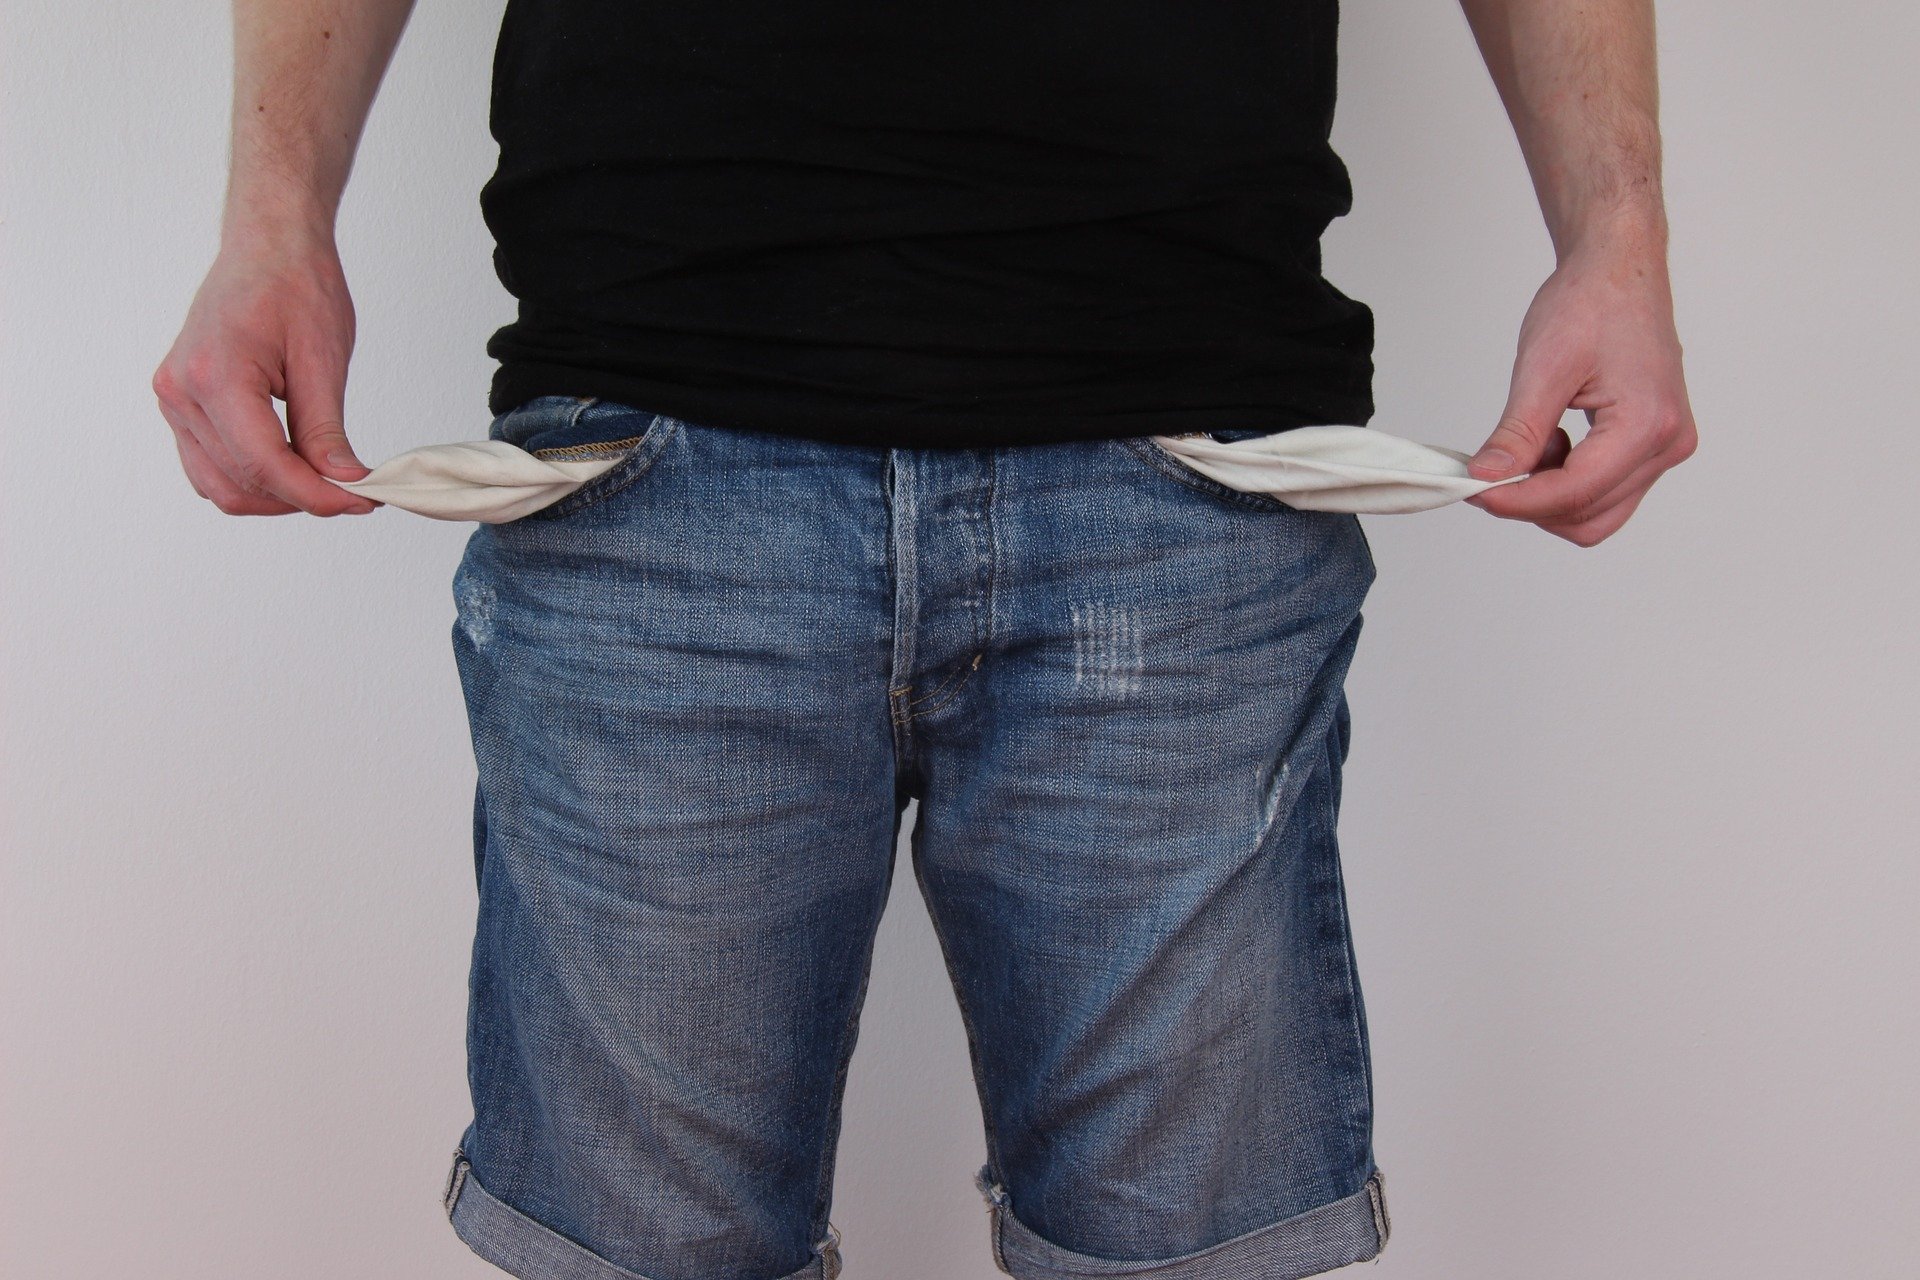 A broke young man shows his empty pockets. | Source: Pixabay.